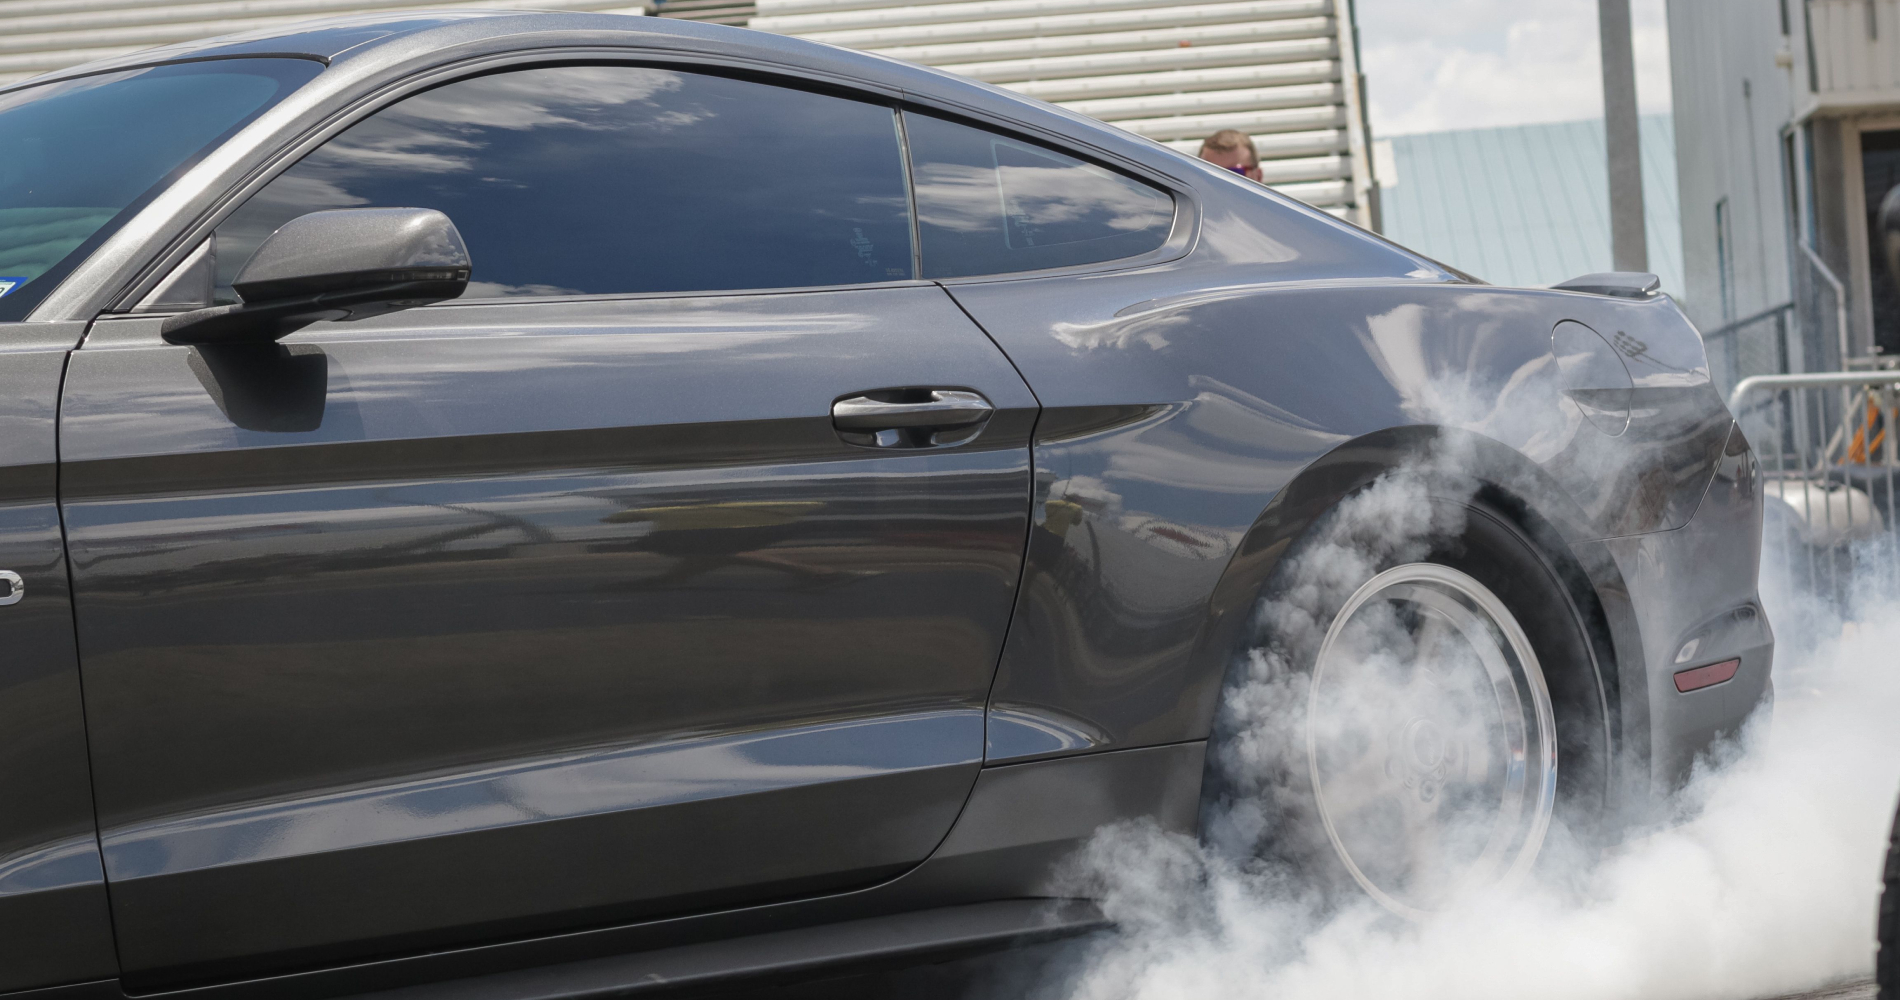 How To Do A Burnout In Your Mustang - How To Do A Burnout In Your Mustang